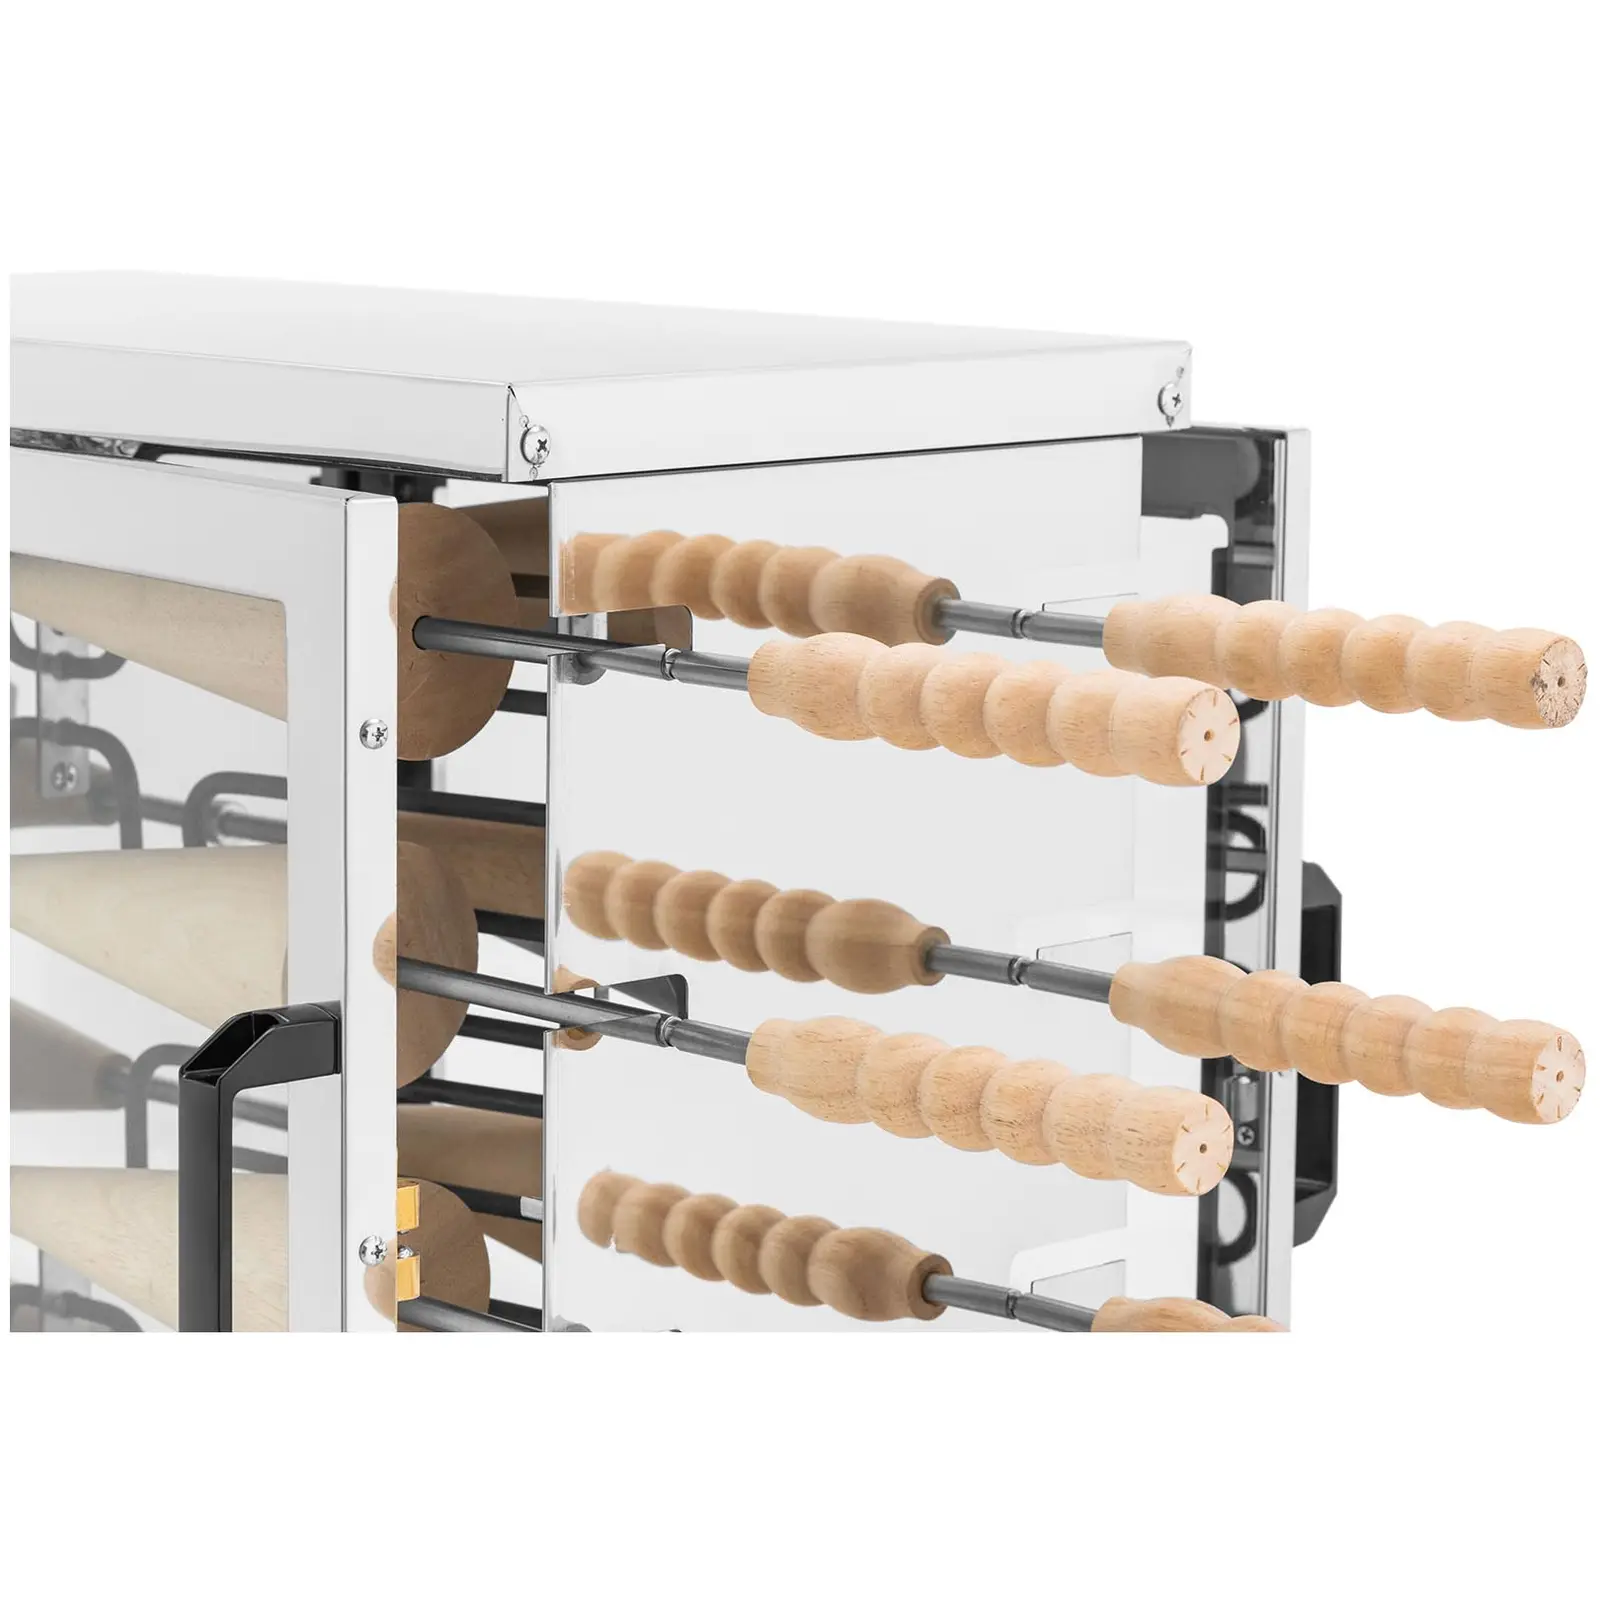 Chimney Cake Oven - 16 rollers - 3500 W - Royal Catering